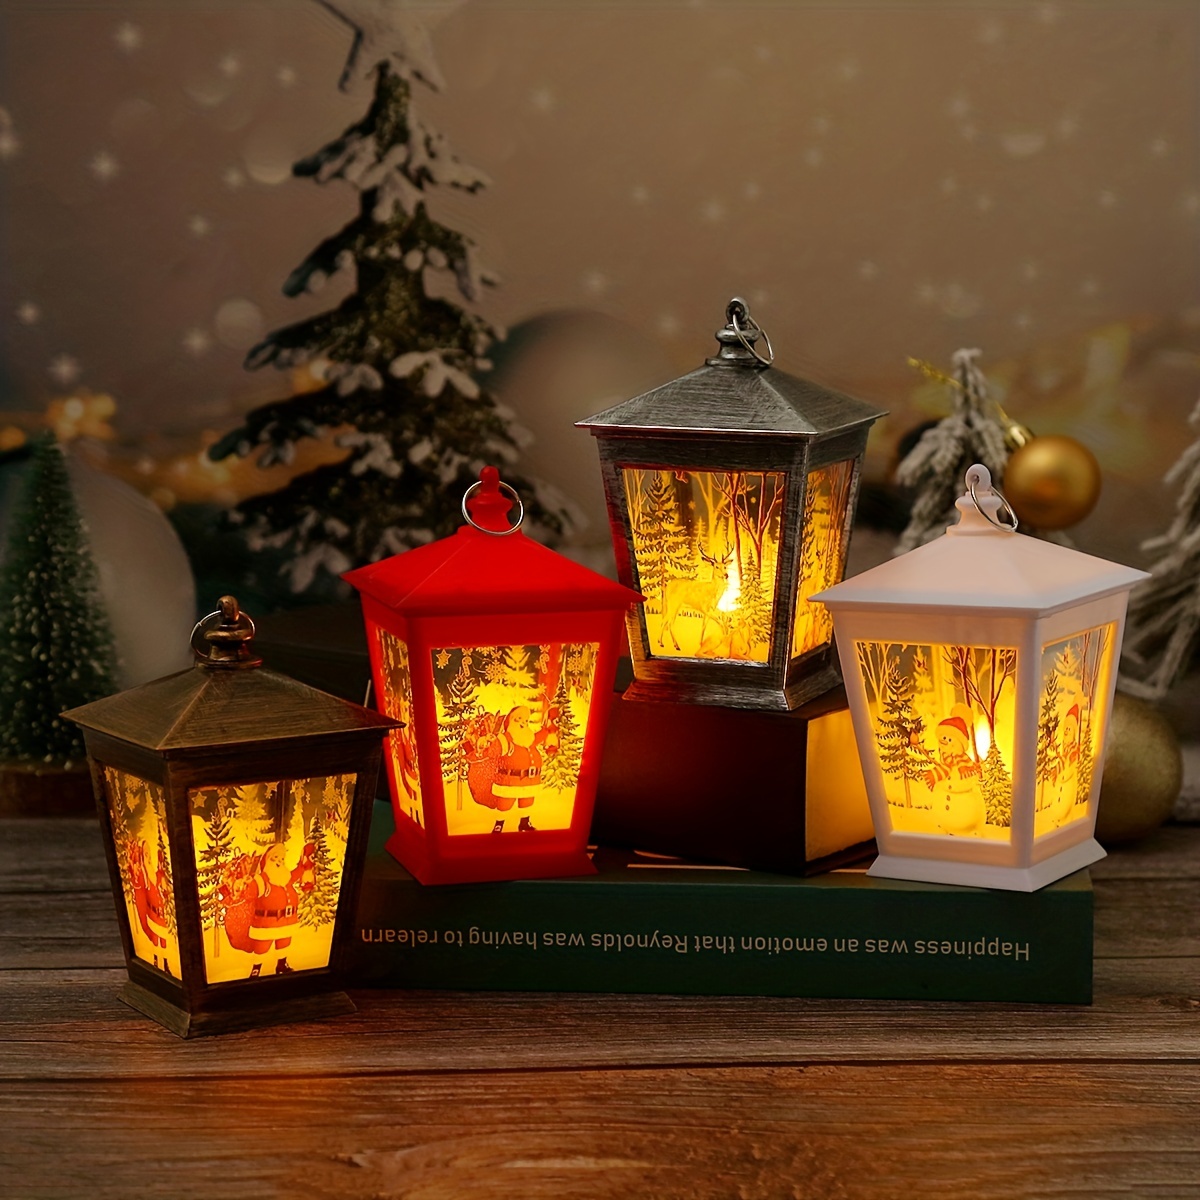 Christmas Flameless Candles Lanterns Decorative: Mini Lantern with Battery  Operated Tea Lights, Christmas Tree Ornaments, Table Centerpieces for